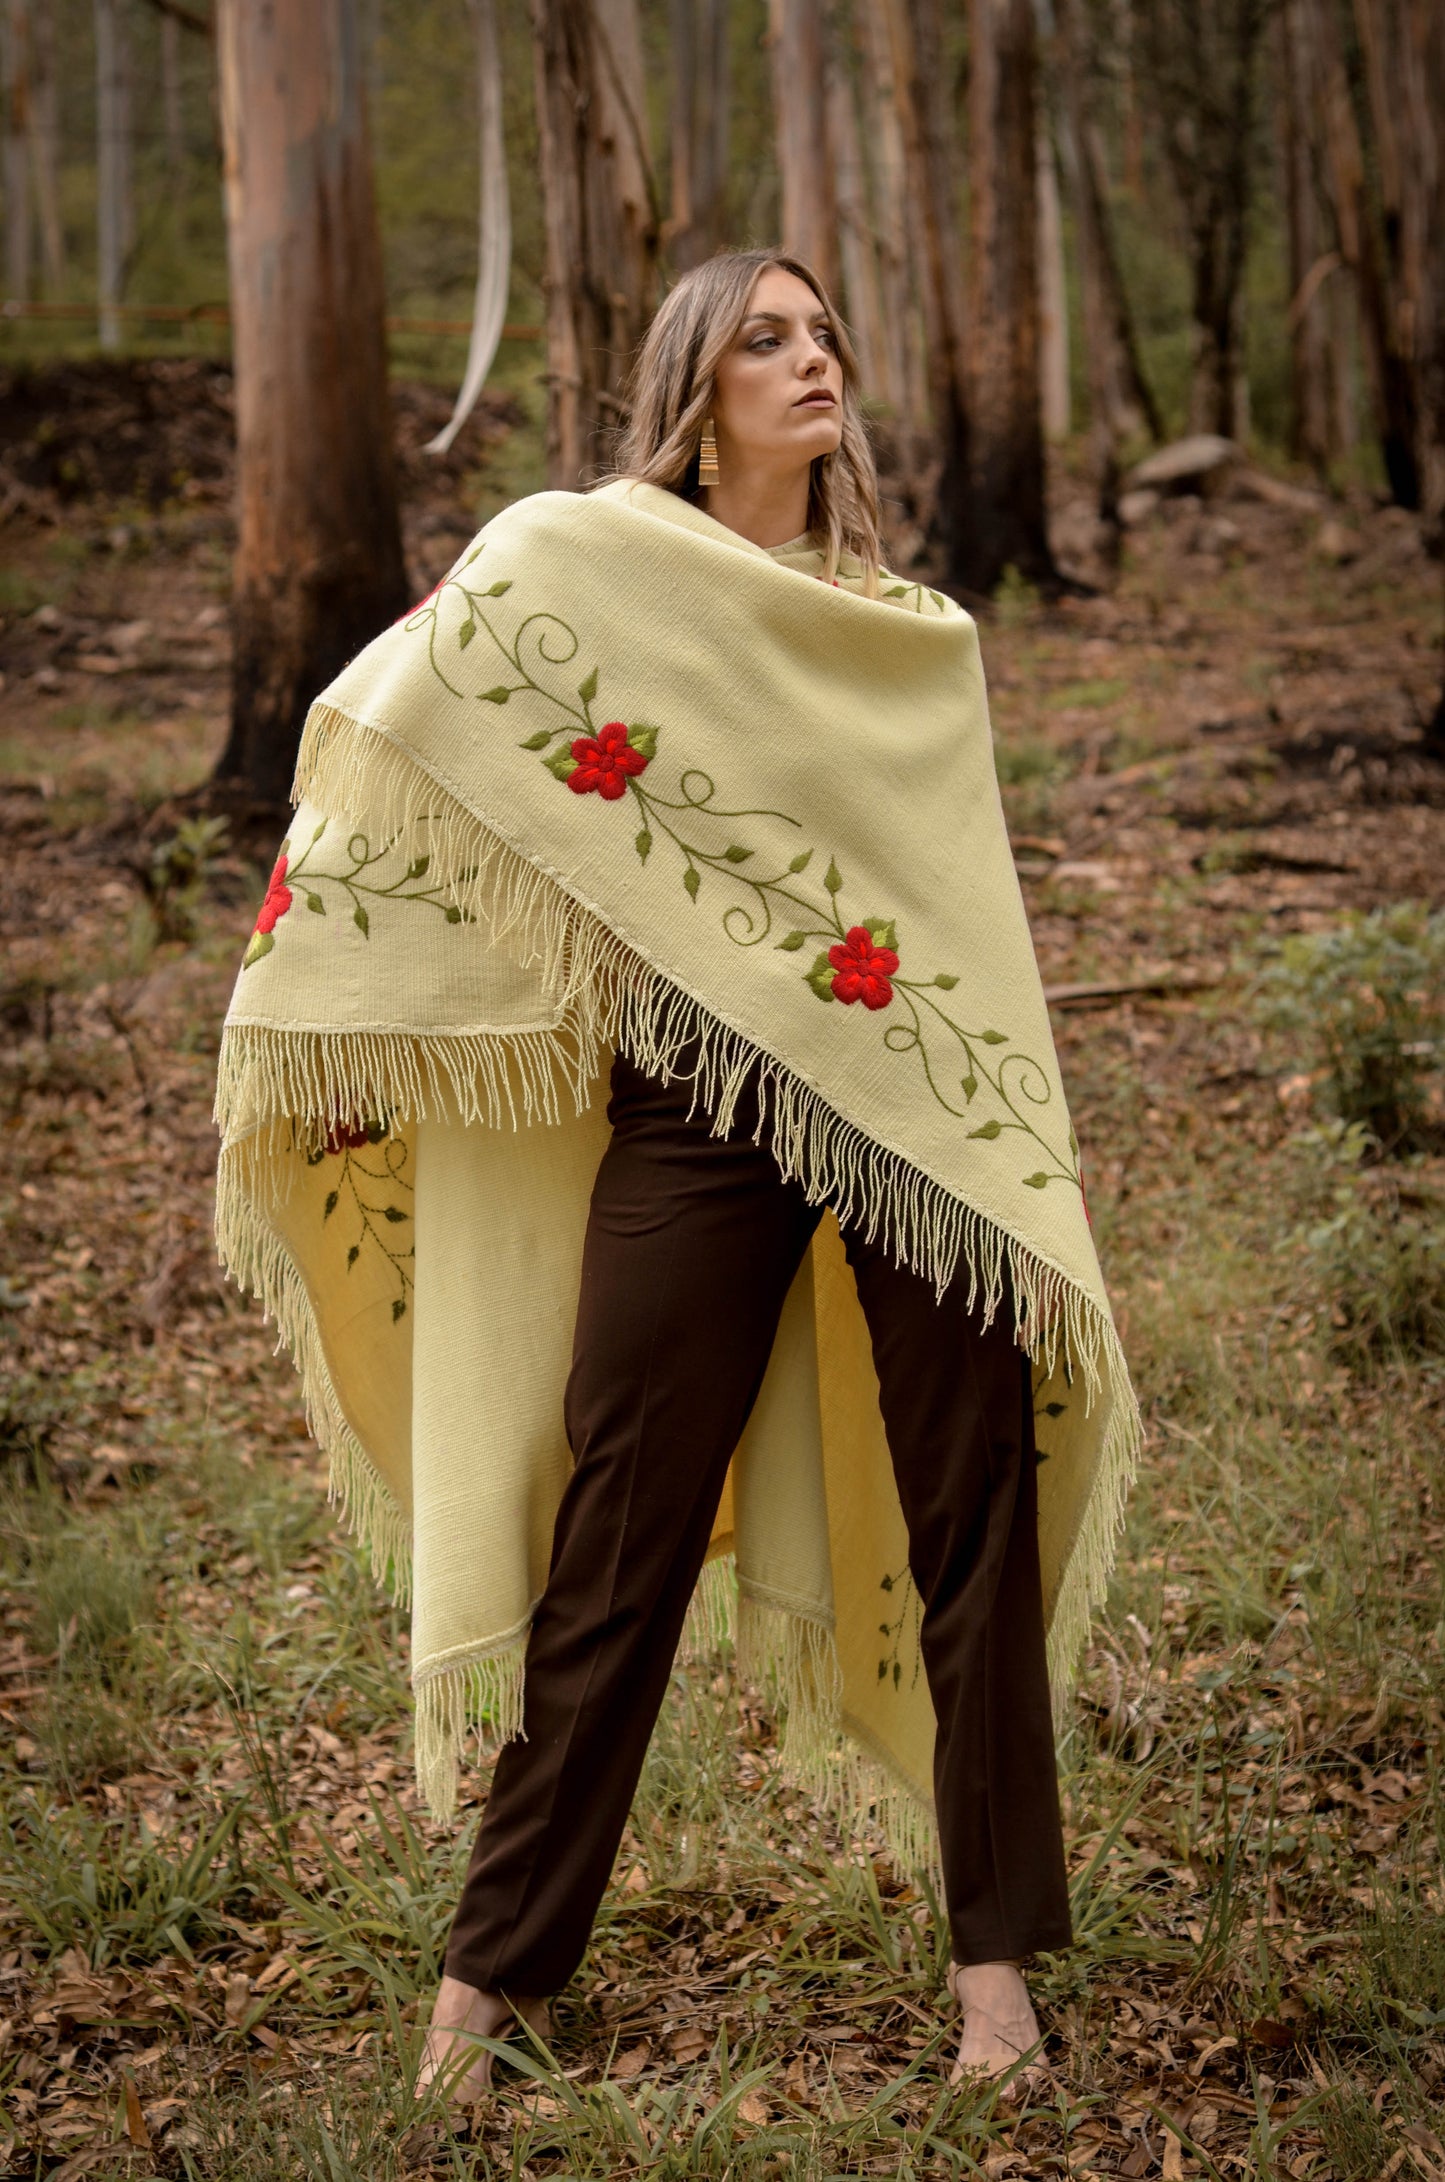 Embroidered Poncho "Villaguay" Creole Loom